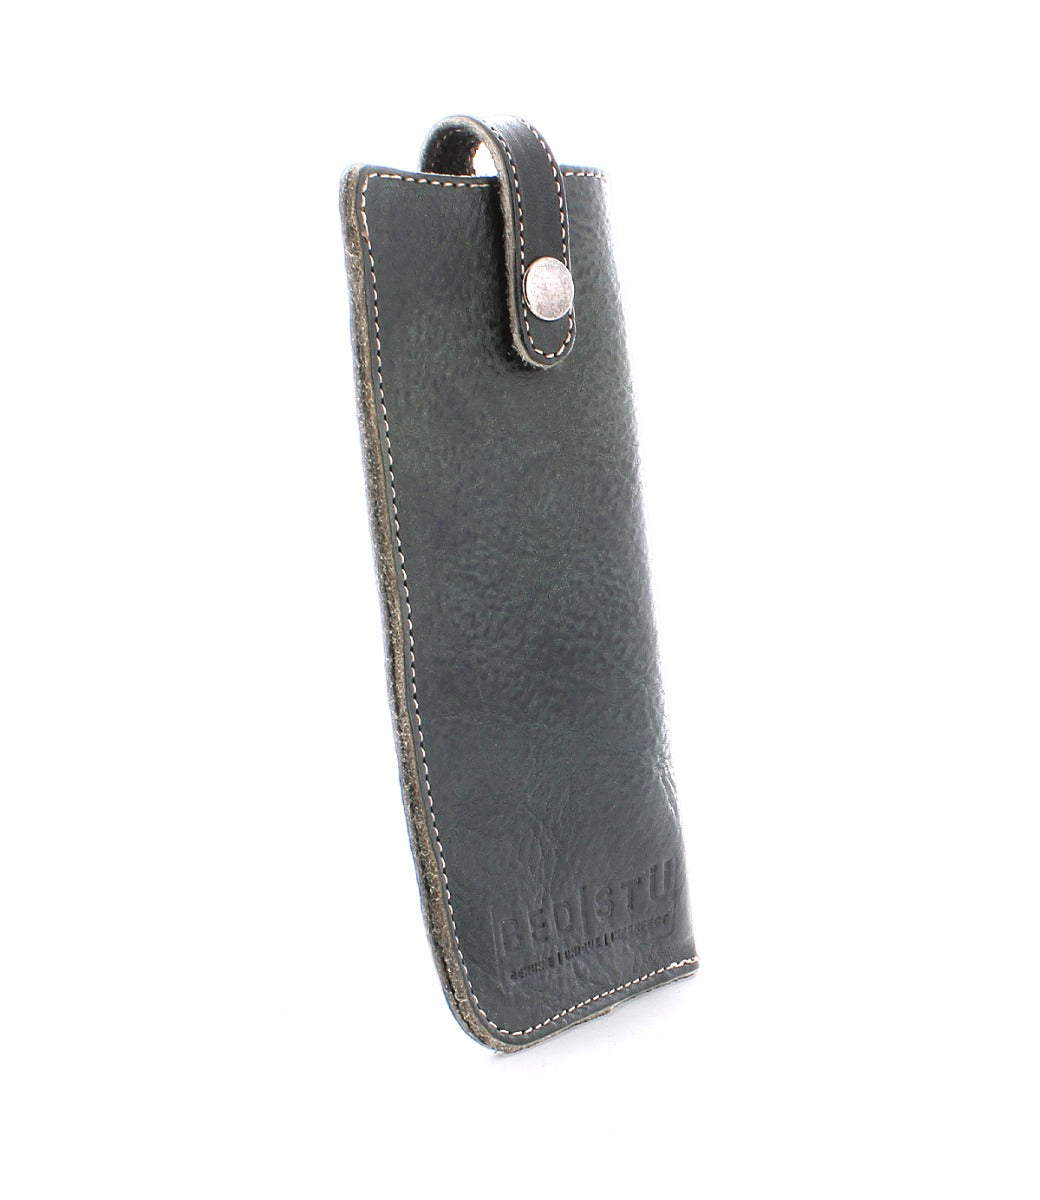 A Behold leather case with a metal clasp by Bed Stu.